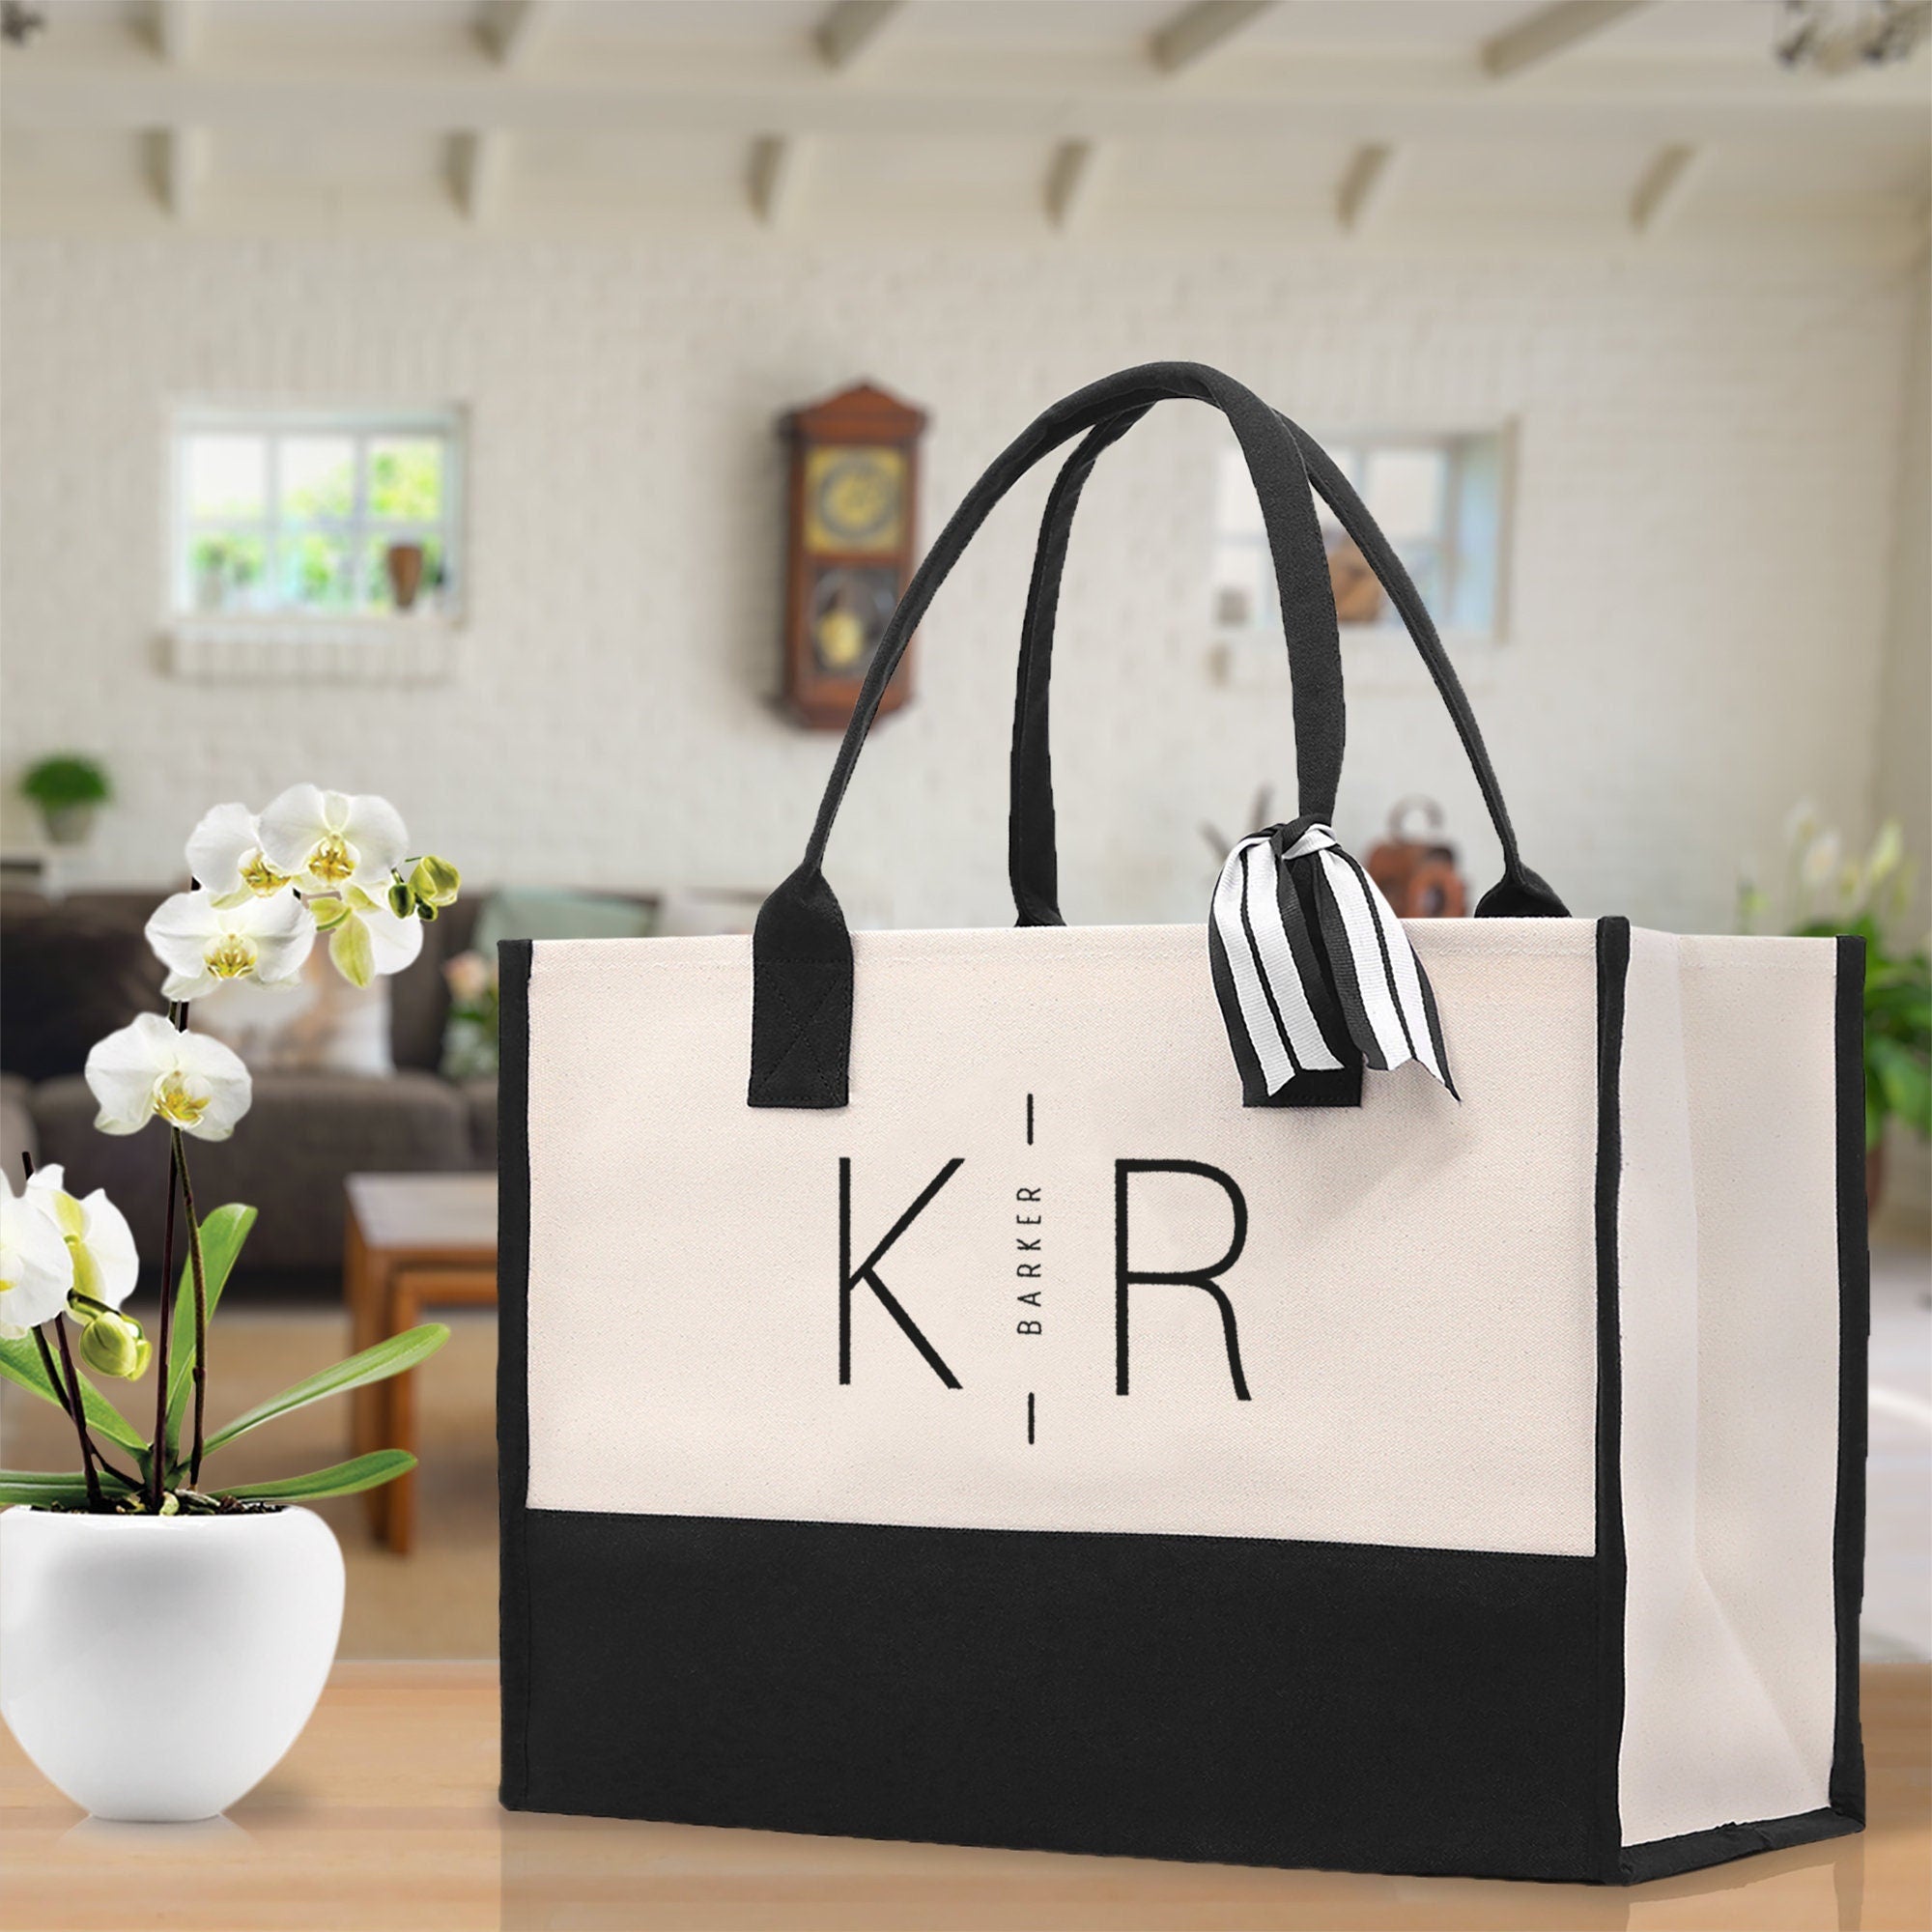 Initials and Last Name Customized Embroidered Tote Bag 100% Cotton Canvas Chic Personalized Tote Bag for Bridesmaid Anniversary Wedding Day